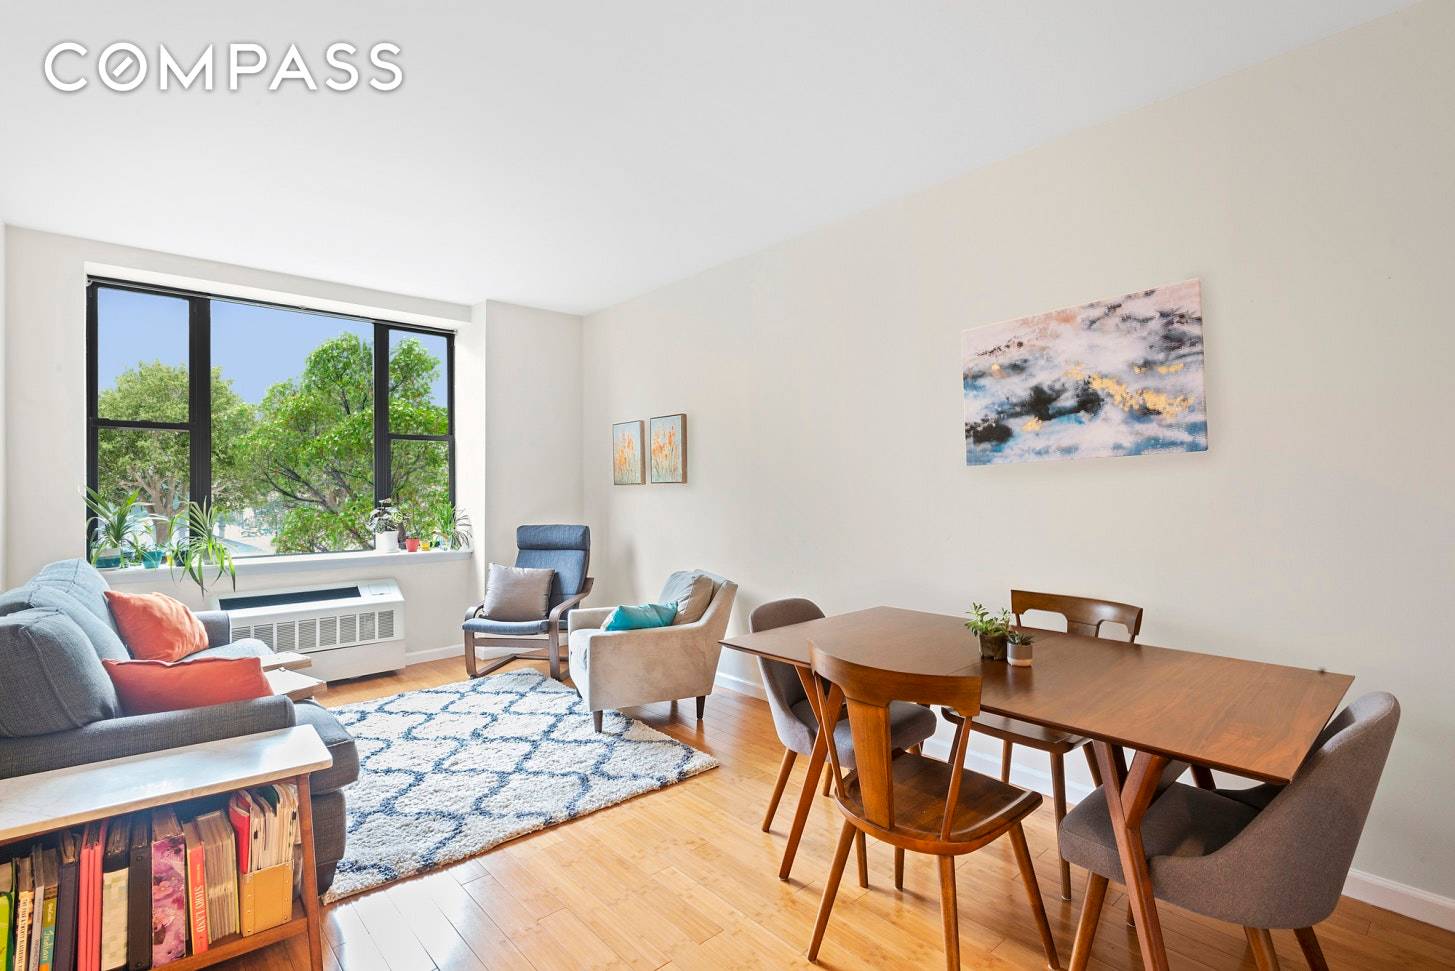 This open and oh so bright apartment is ready for you to make it your home.